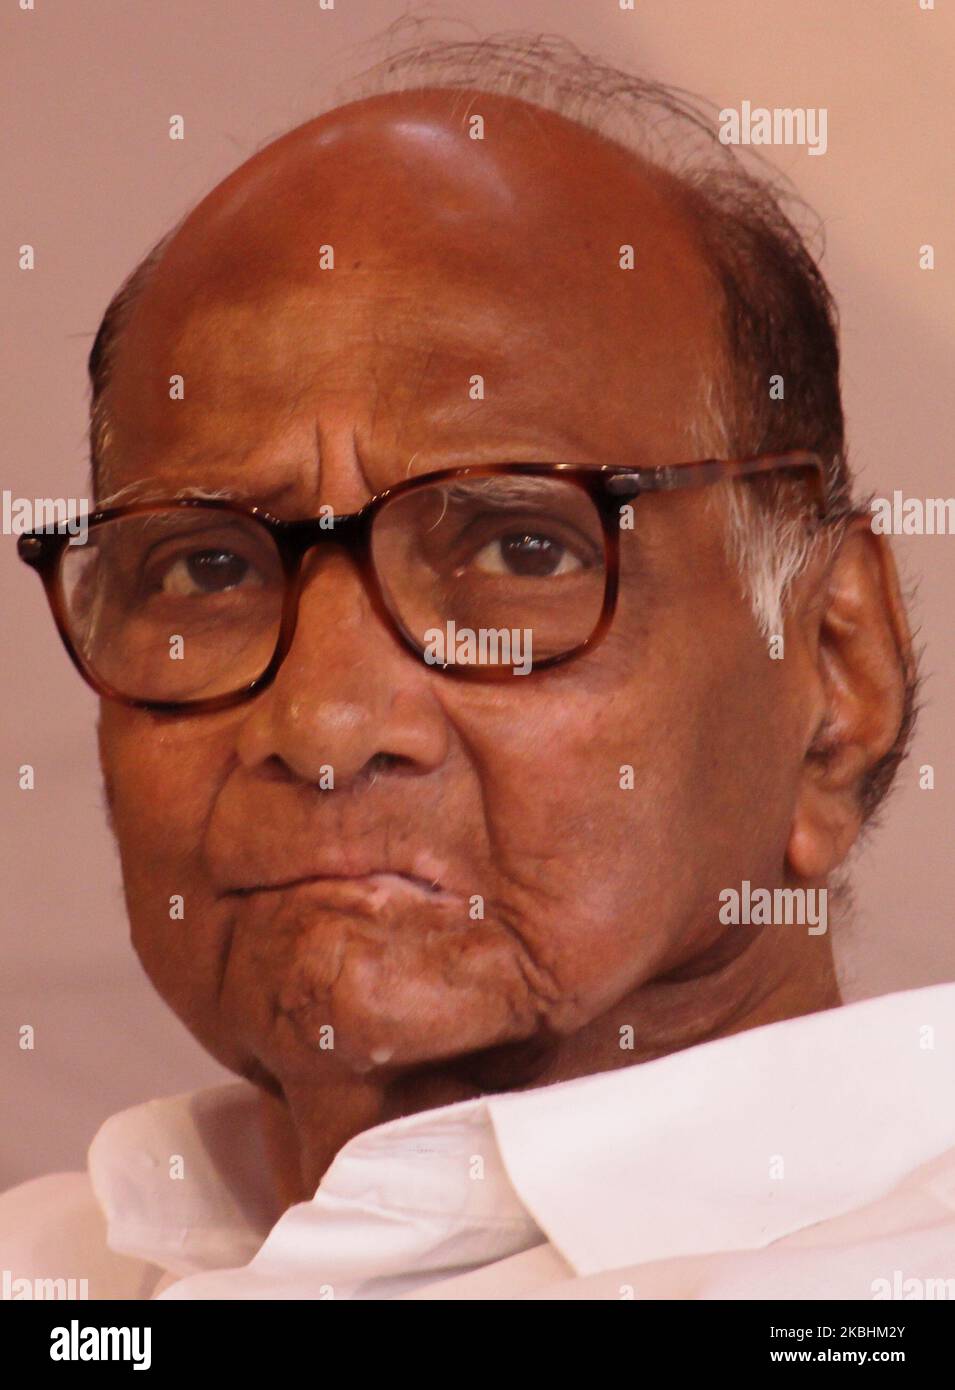 The Nationalist Congress Party (NCP) chief Sharad Pawar looks on during an event on February 23, 2020 in Mumbai, India. (Photo by Himanshu Bhatt/NurPhoto) Stock Photo